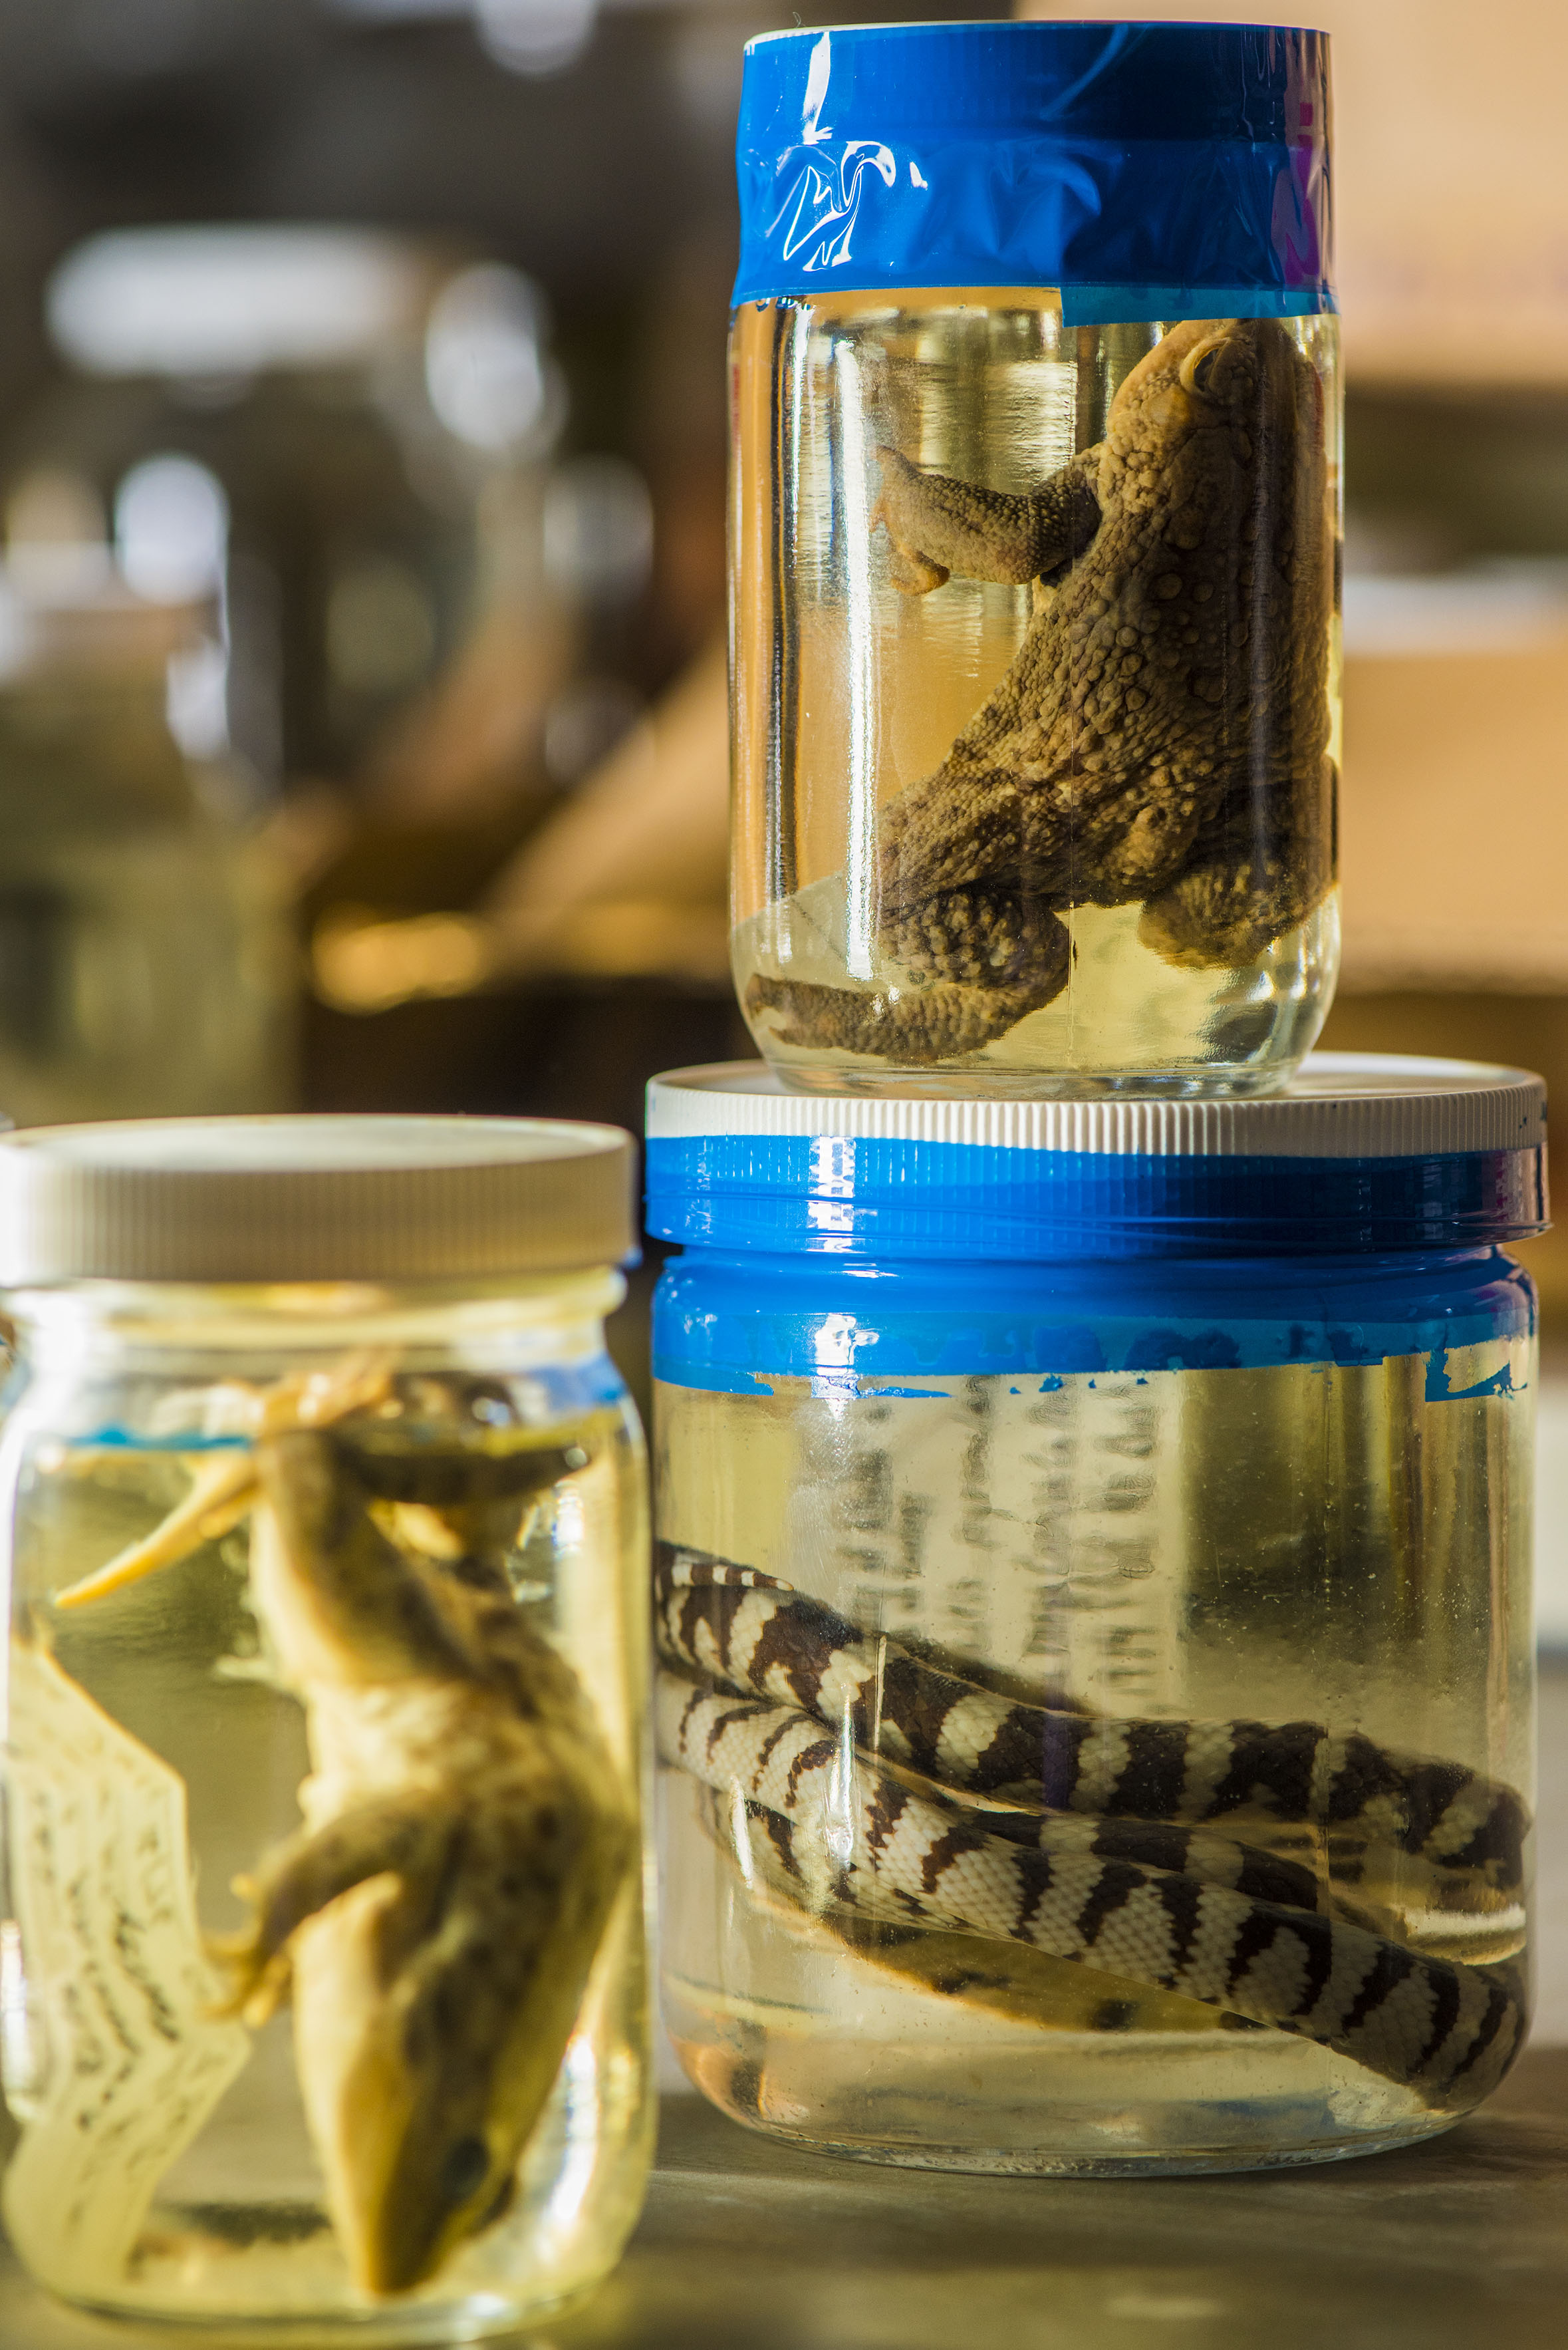 Three stacked jars of individually preserved specimens, containing two frogs and one snake, that are sealed with blue tape.